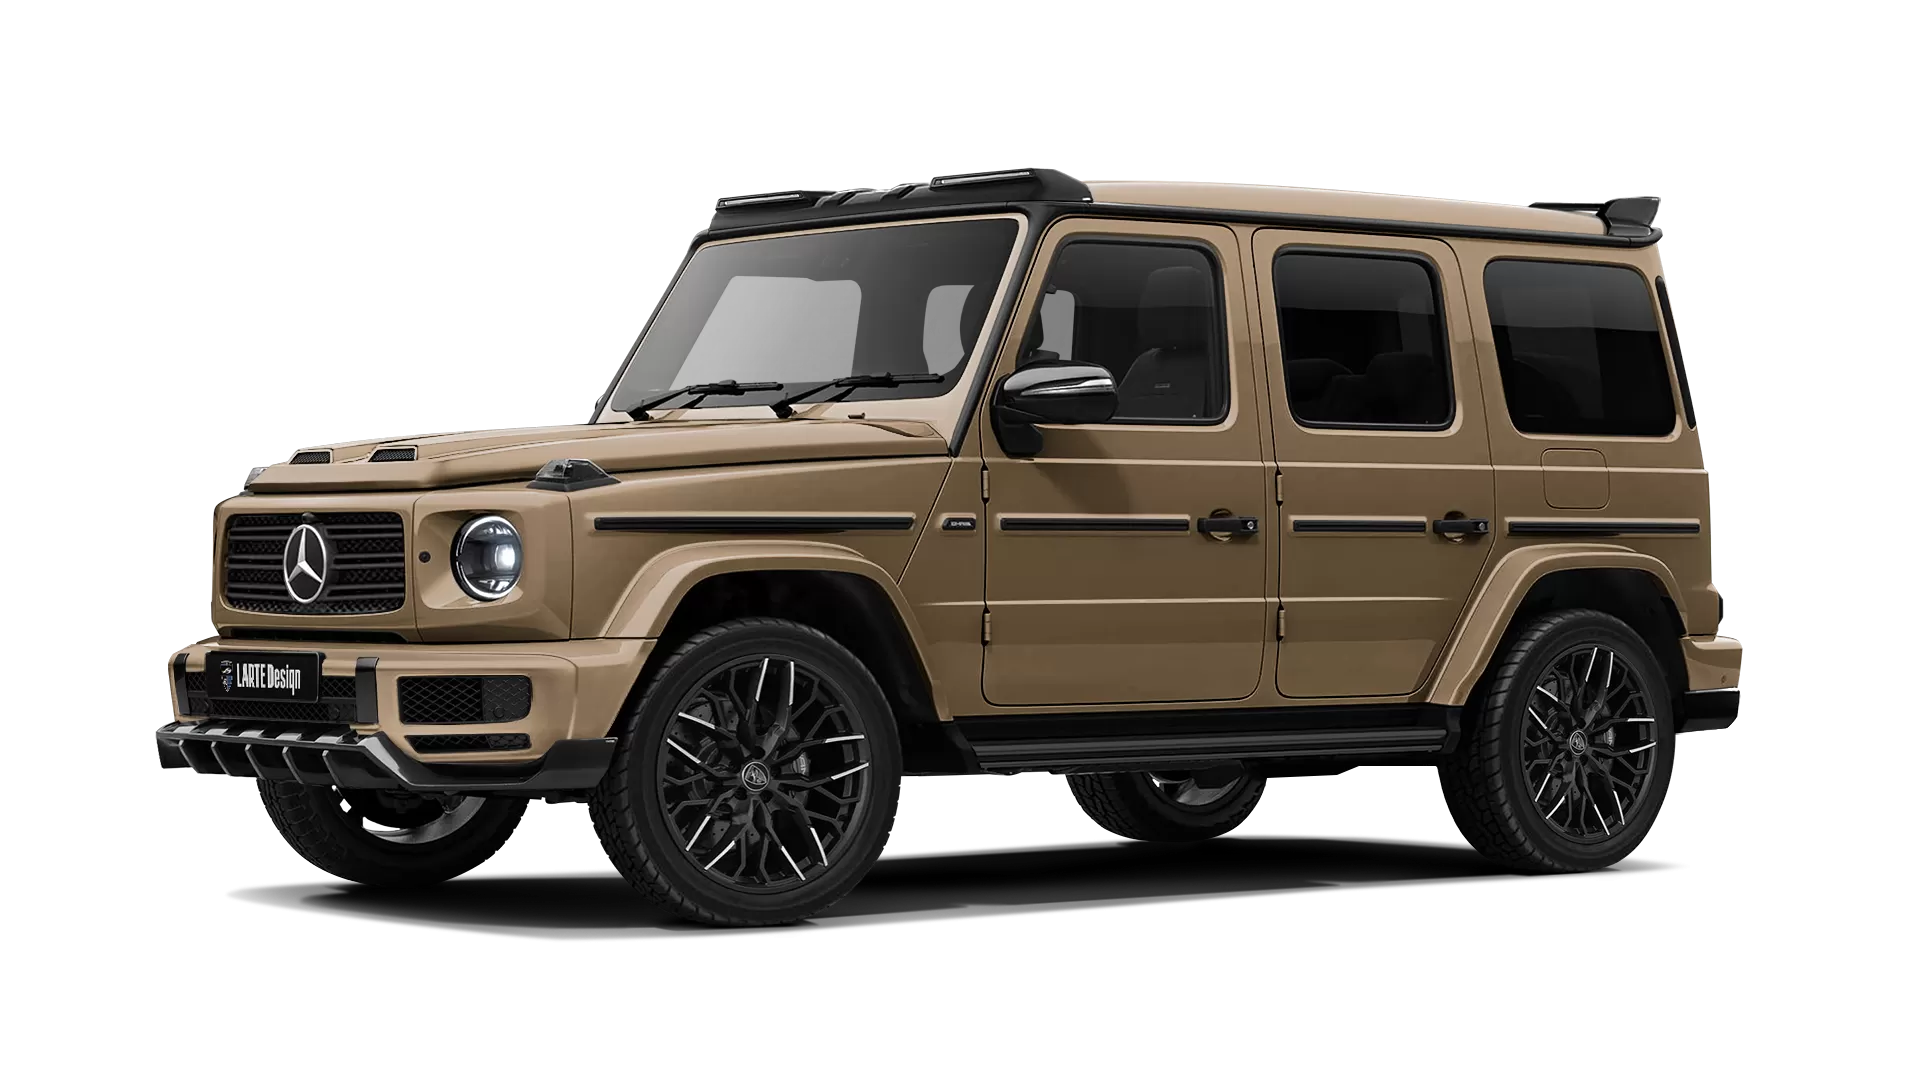 Mercedes G class W463 with painted body kit: front view shown in Desert Sand